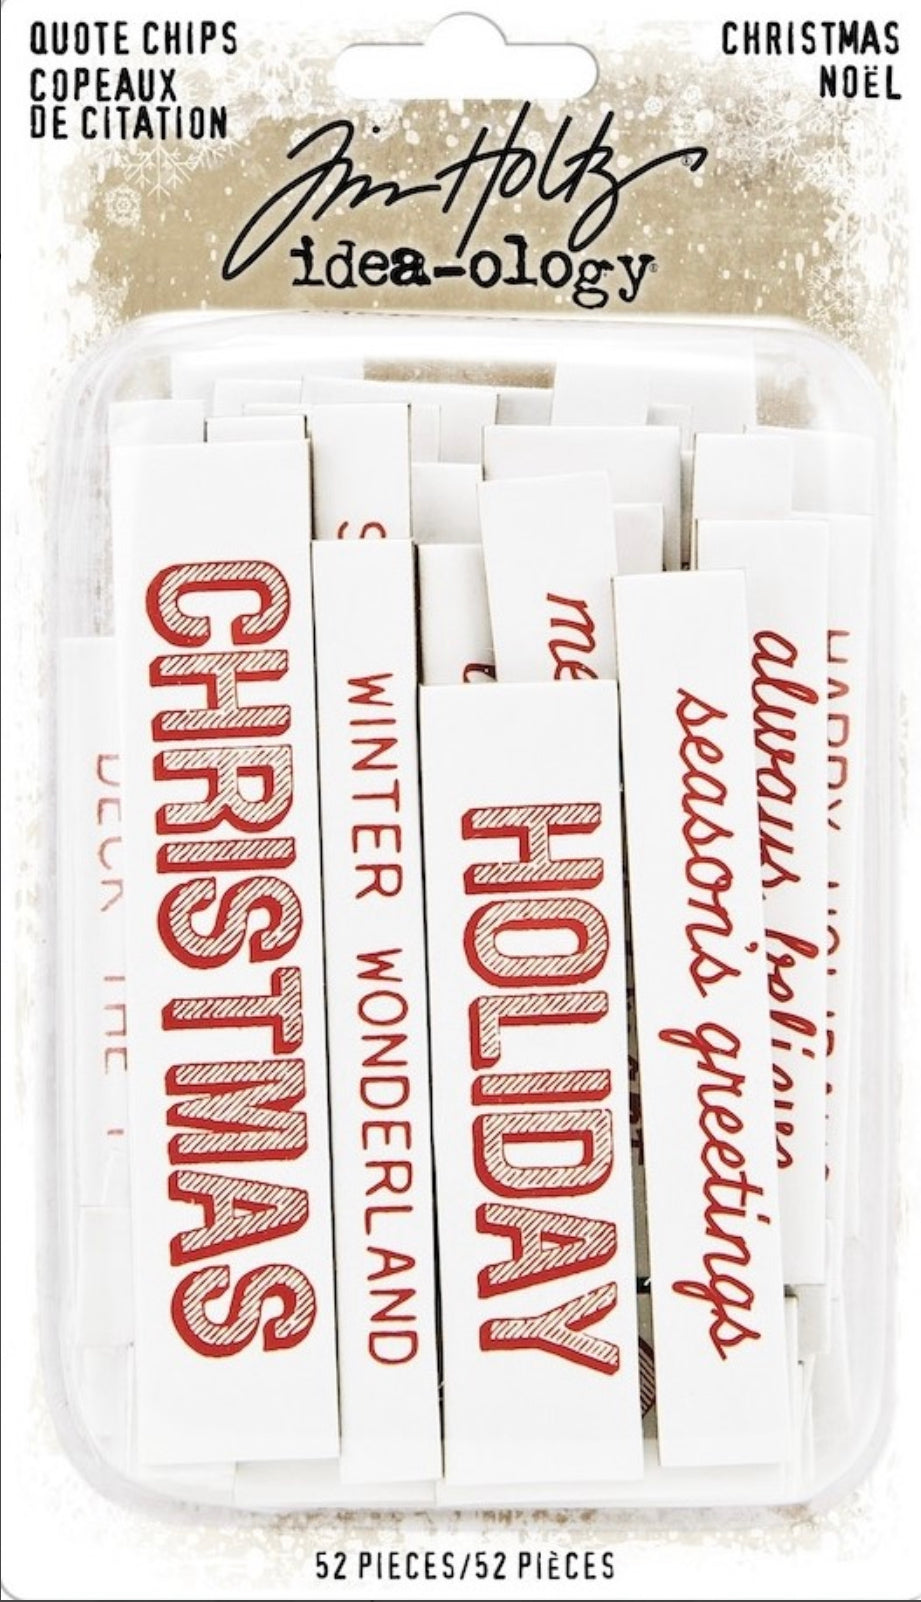 Tim Holtz idea-ology - Quote chips: Christmas 2019